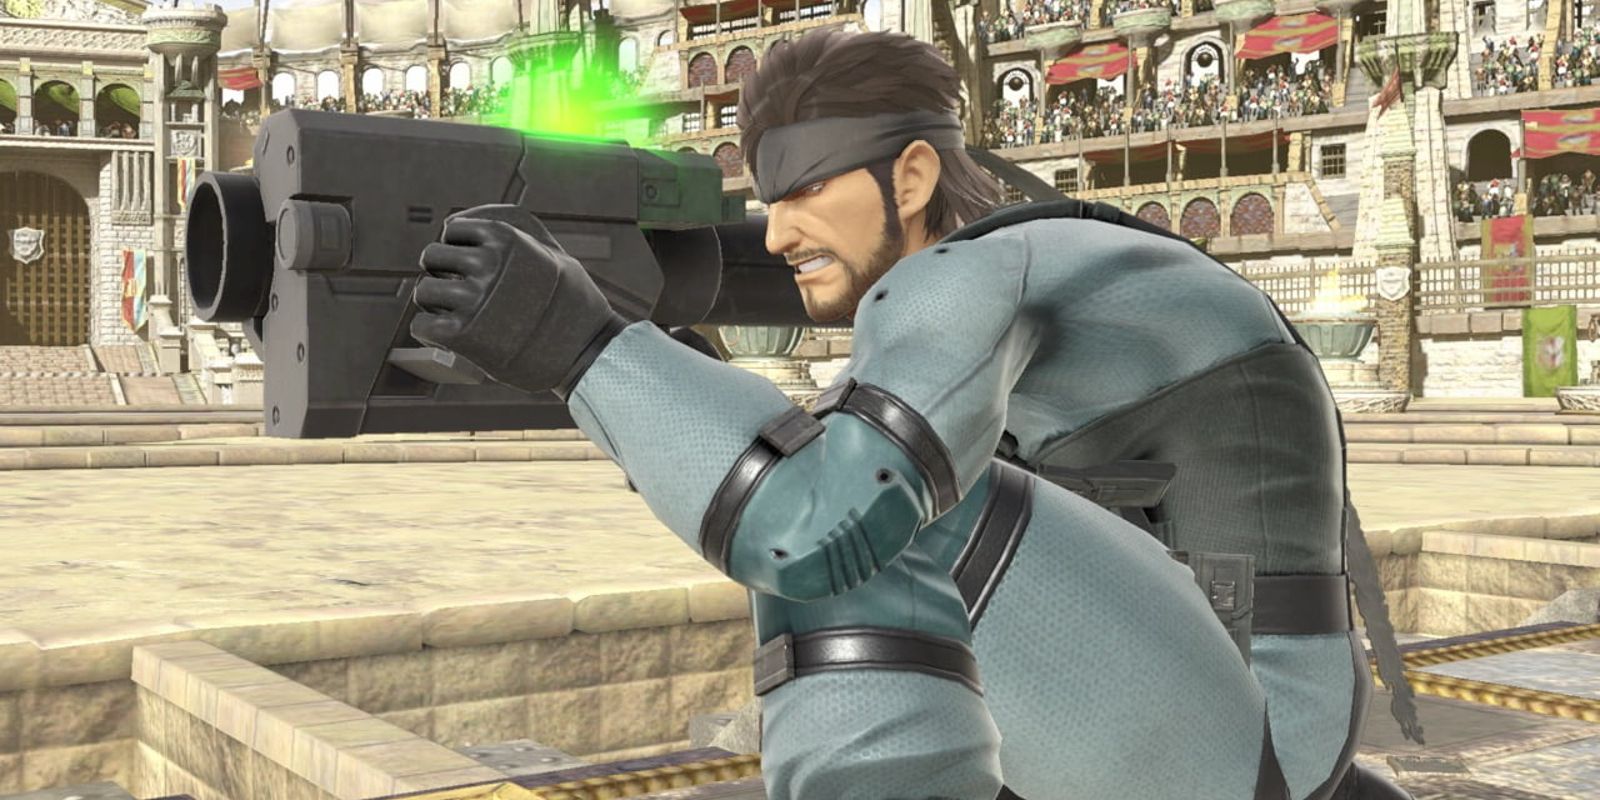 Solid Snake aiming a rocket launcher in Super Smash Bros. Ultimate